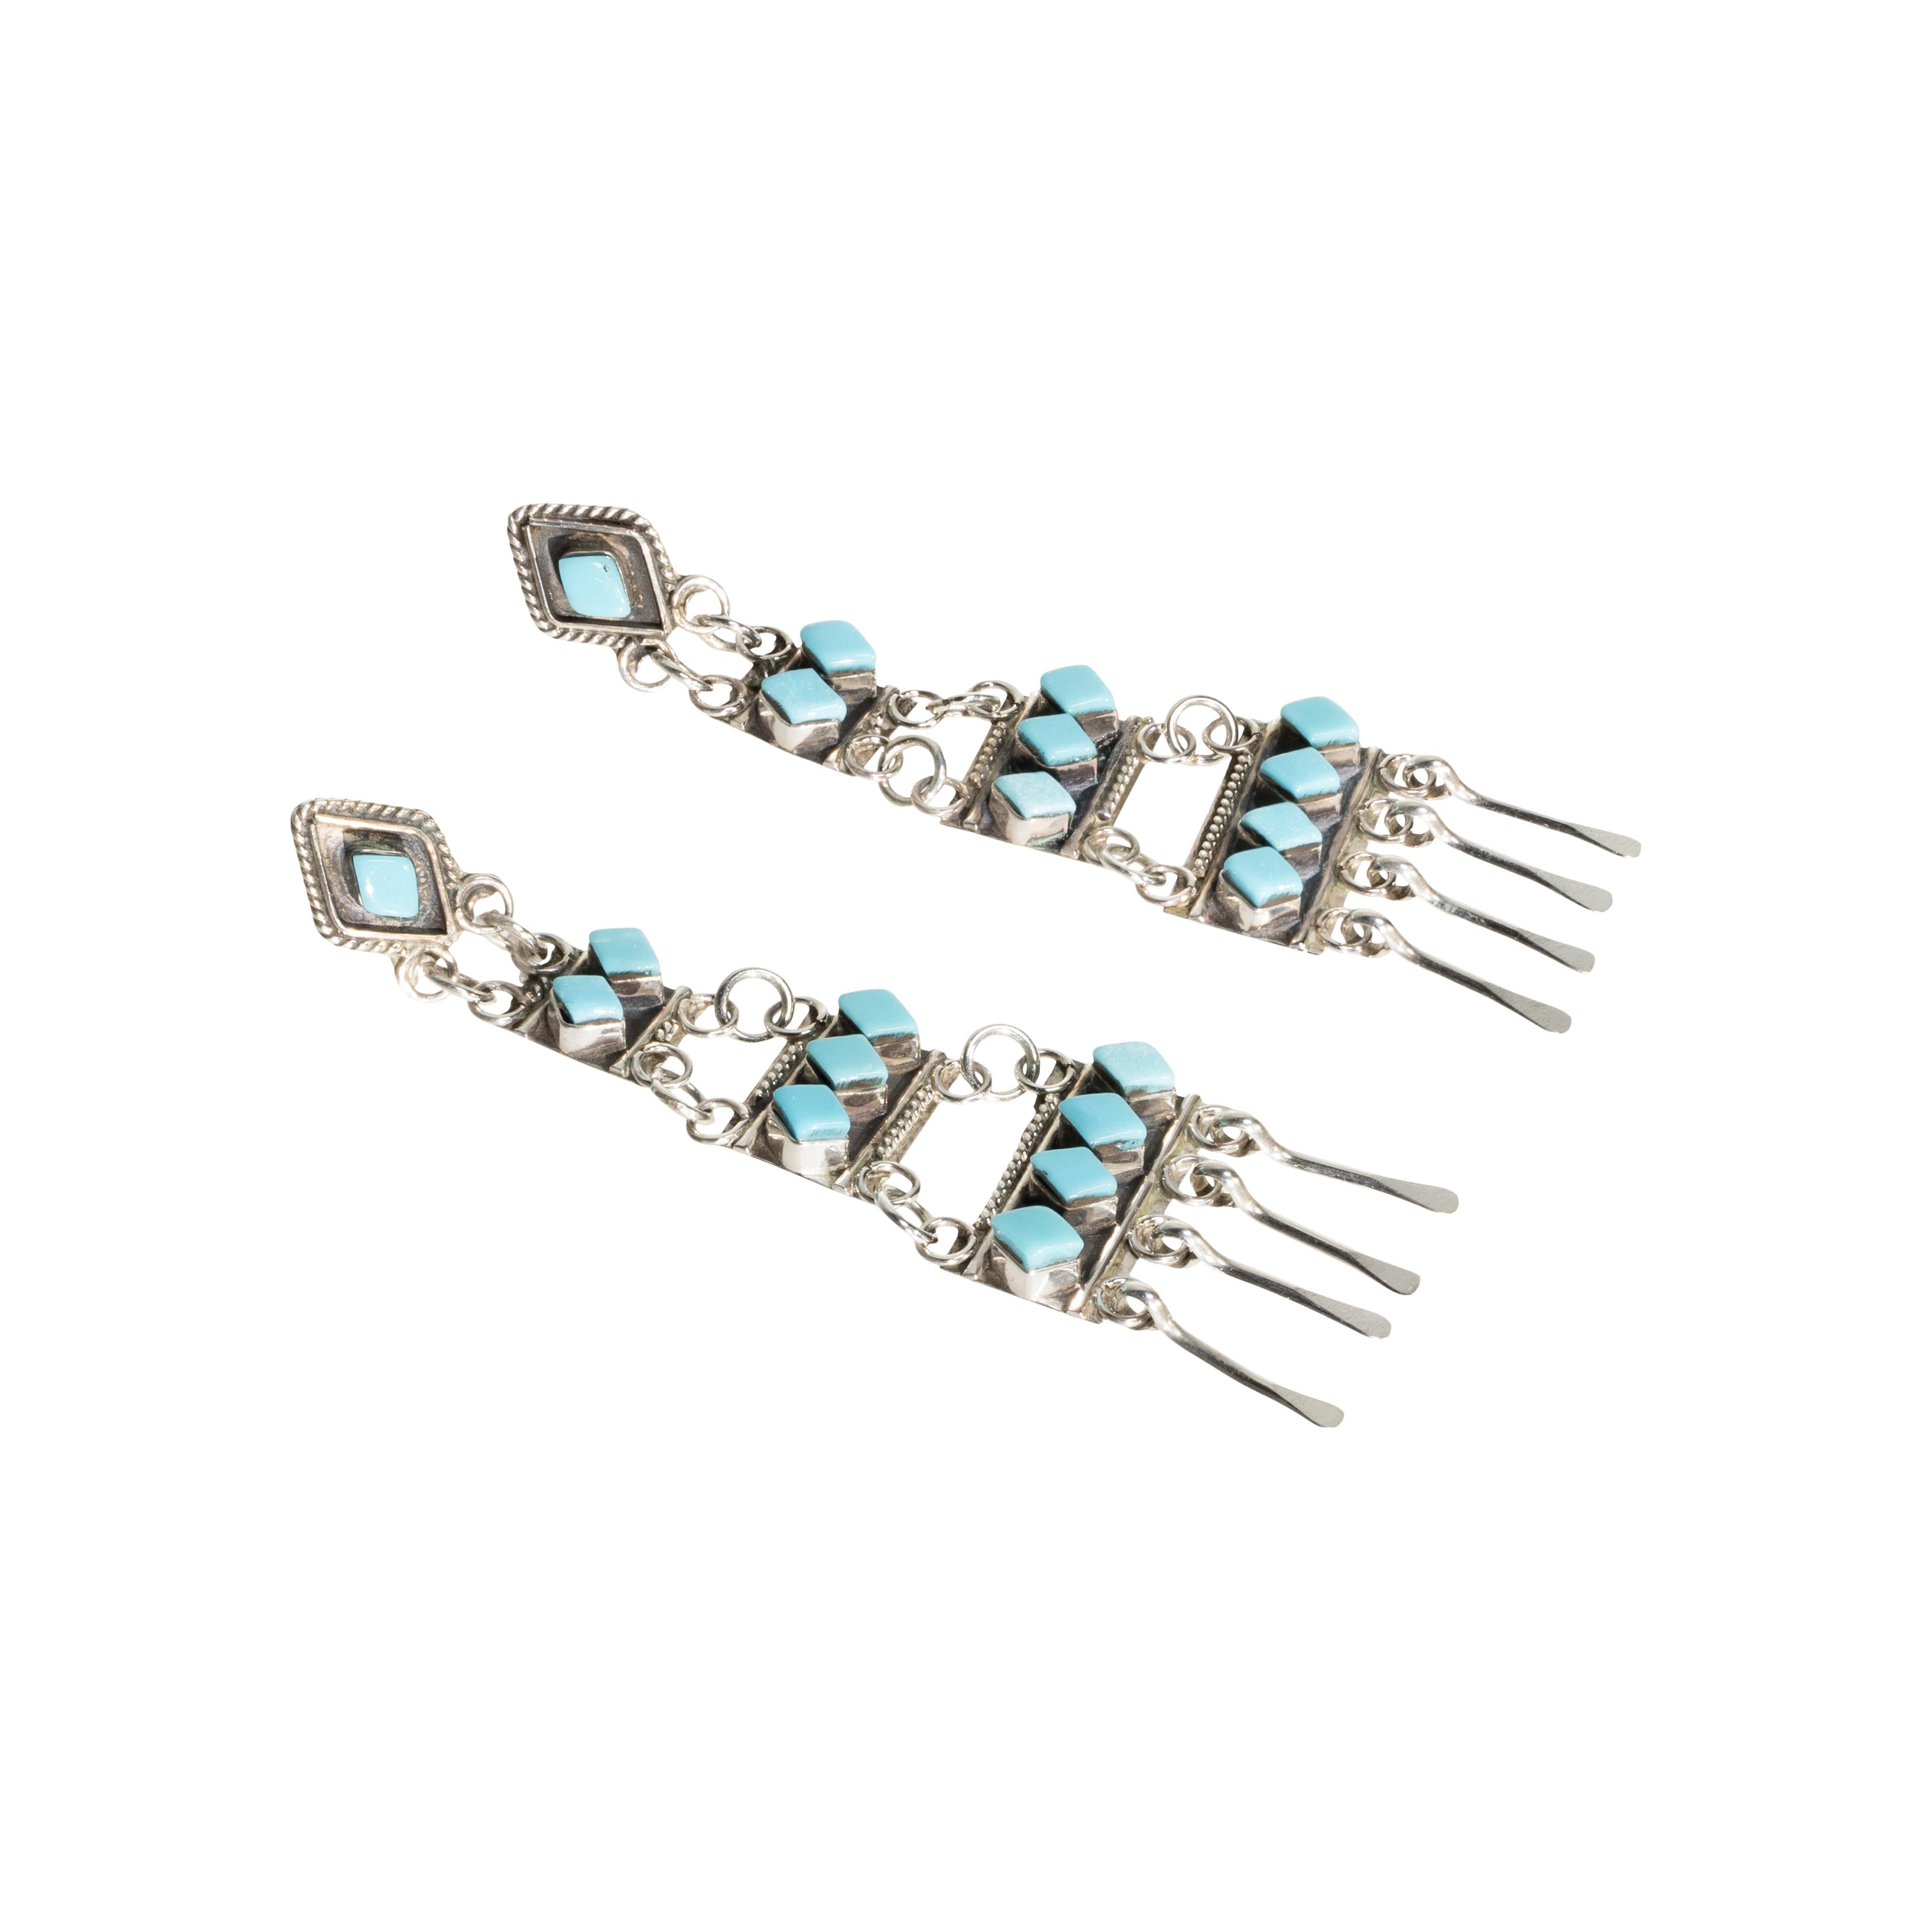 Zuni Sleeping Beauty turquoise and sterling earrings. Post backs with ten clear Sleeping Beauty stones set in shadow box with twisted rope borders ending in silver spoon drops. Lightweight and eye catching. 

PERIOD: Late 20th Century
ORIGIN: